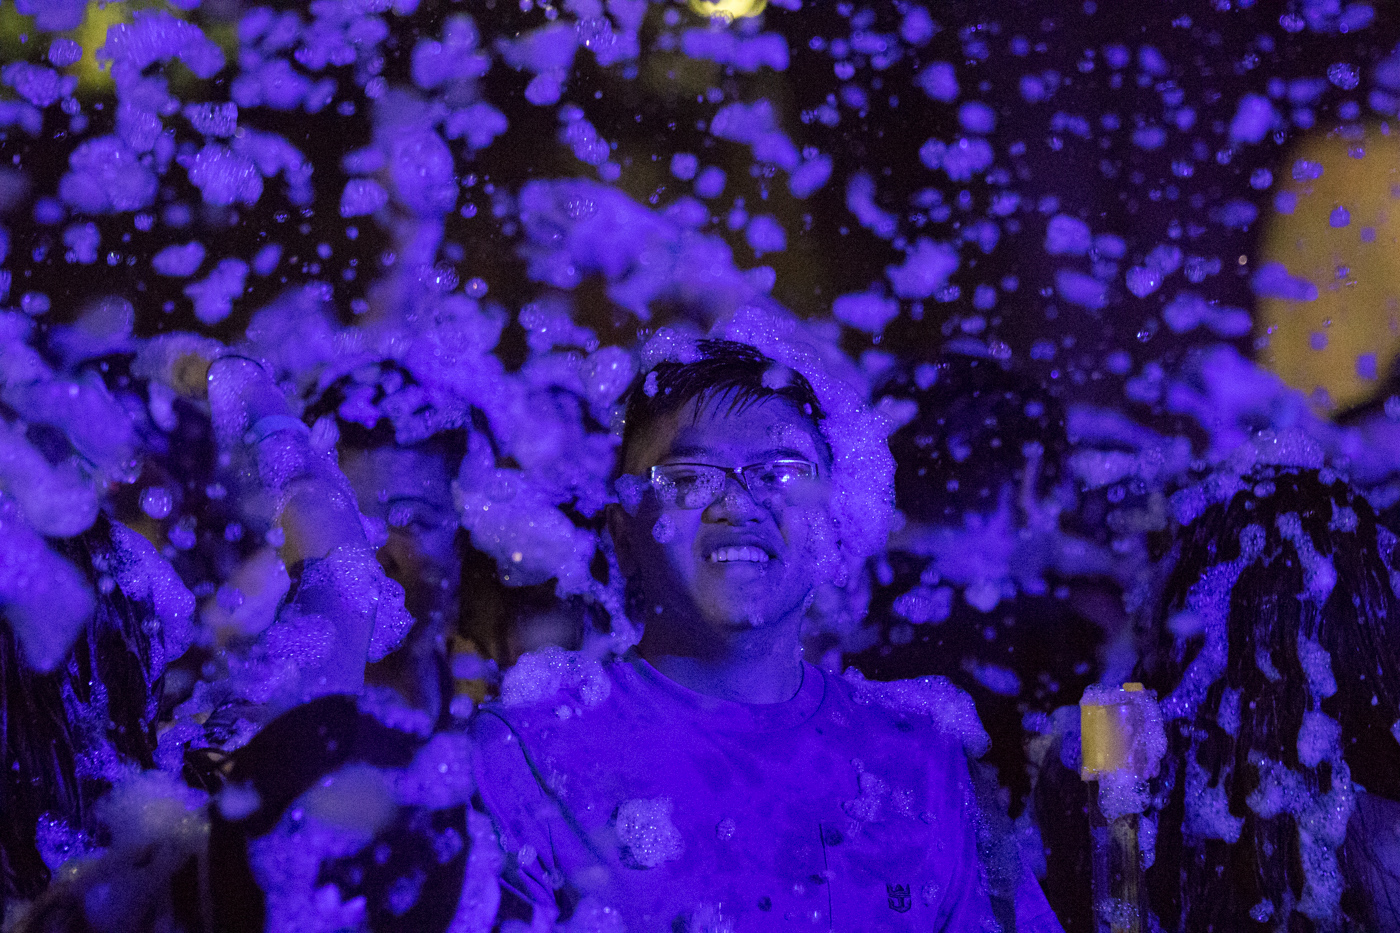 The foam is falling down while students smile from cheek to cheek.